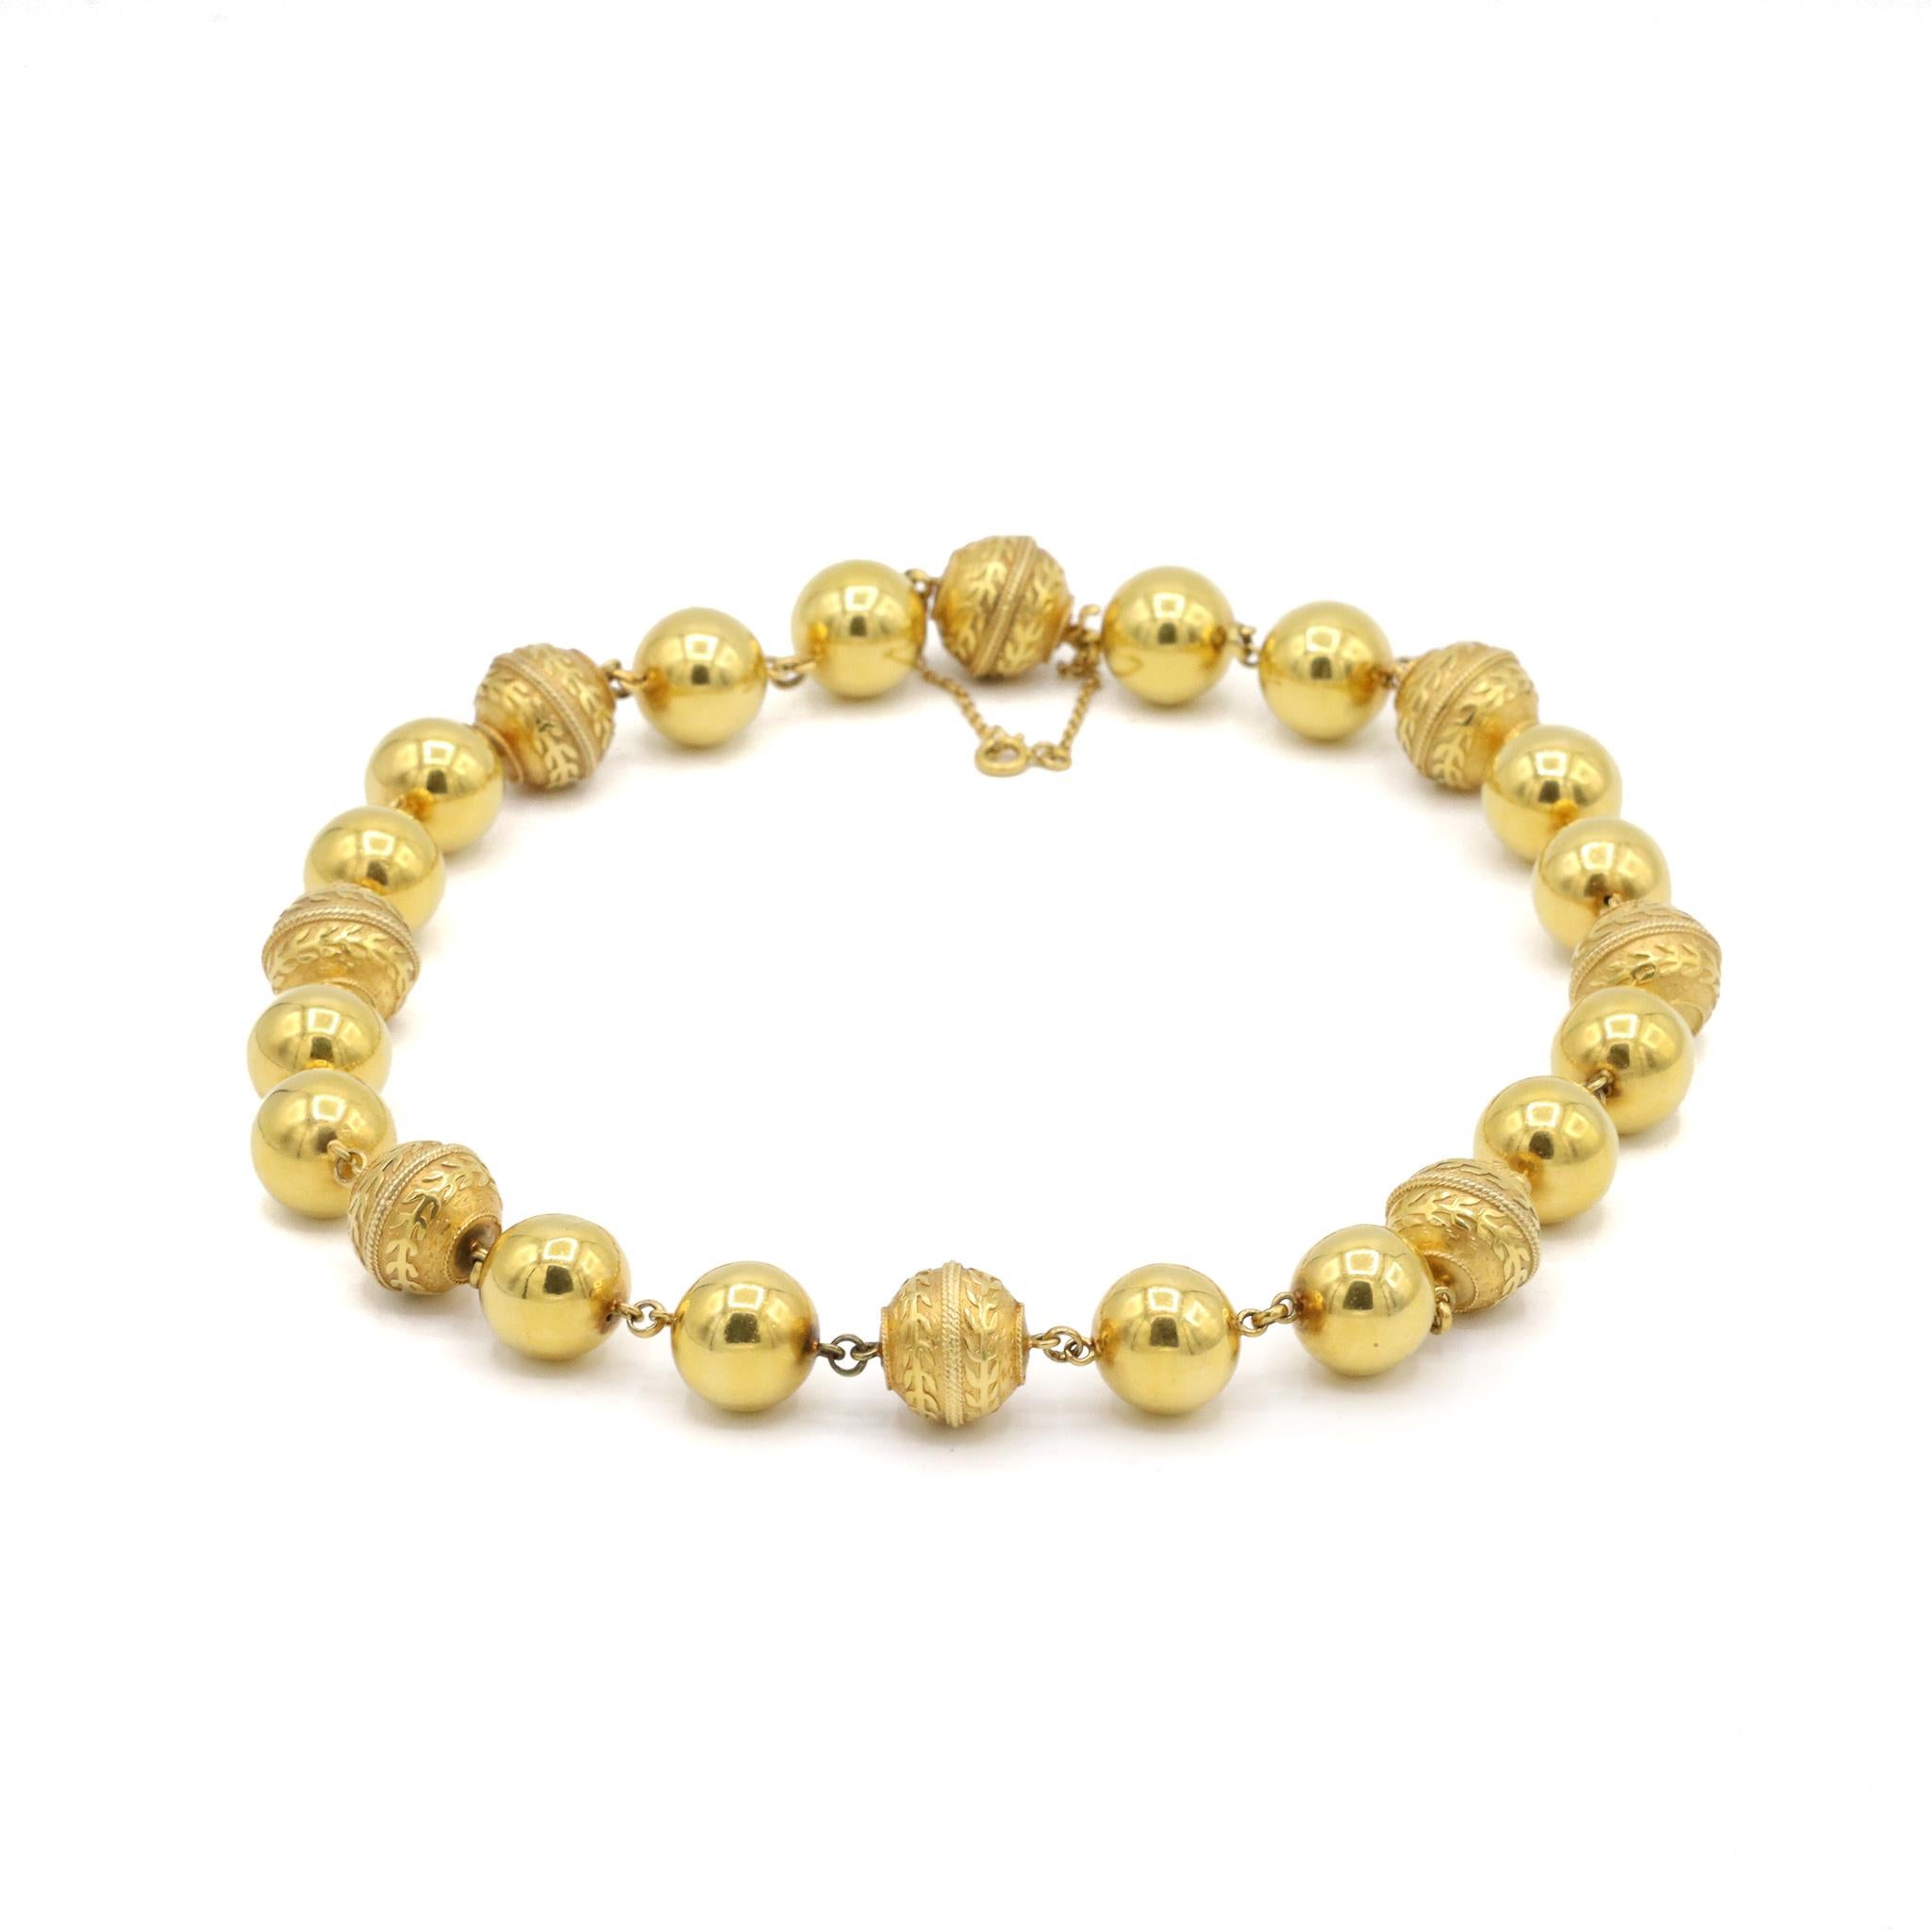 One lady's handmade textured & polished, filigree-style 19K yellow gold single strand choker, bead necklace. The necklace measures approximately 20.00 inches in length and weighs a total of 96.00 grams. Engraved with 